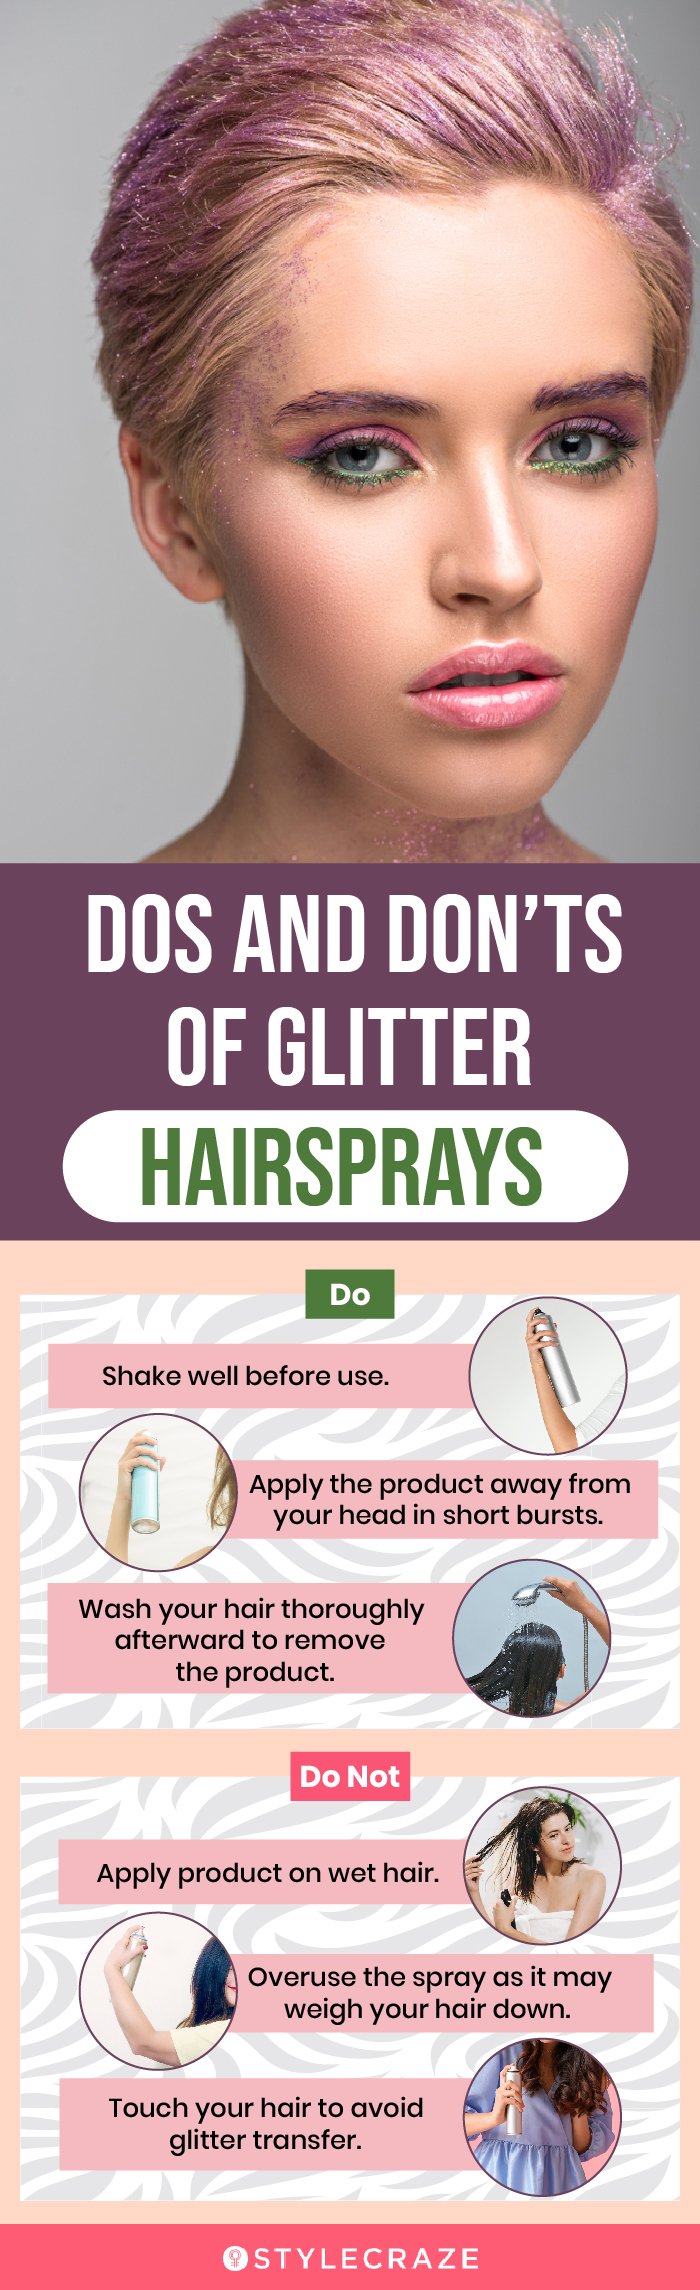 Dos And Don’ts Of Glitter Hairsprays (infographic)